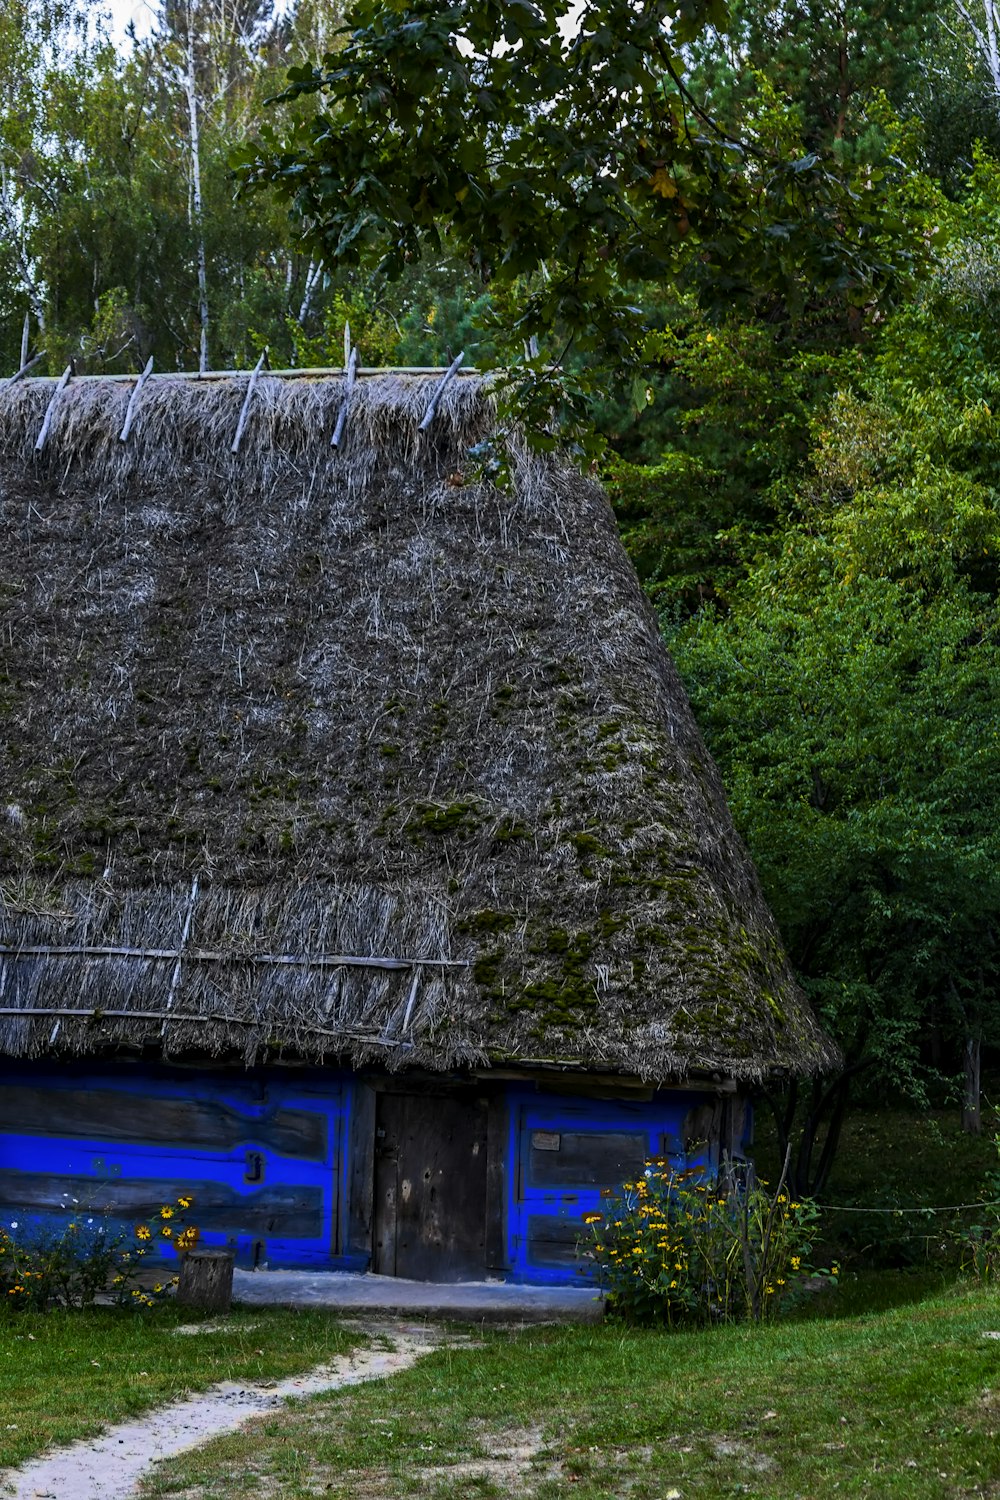 a blue house with a thatched roof in the woods